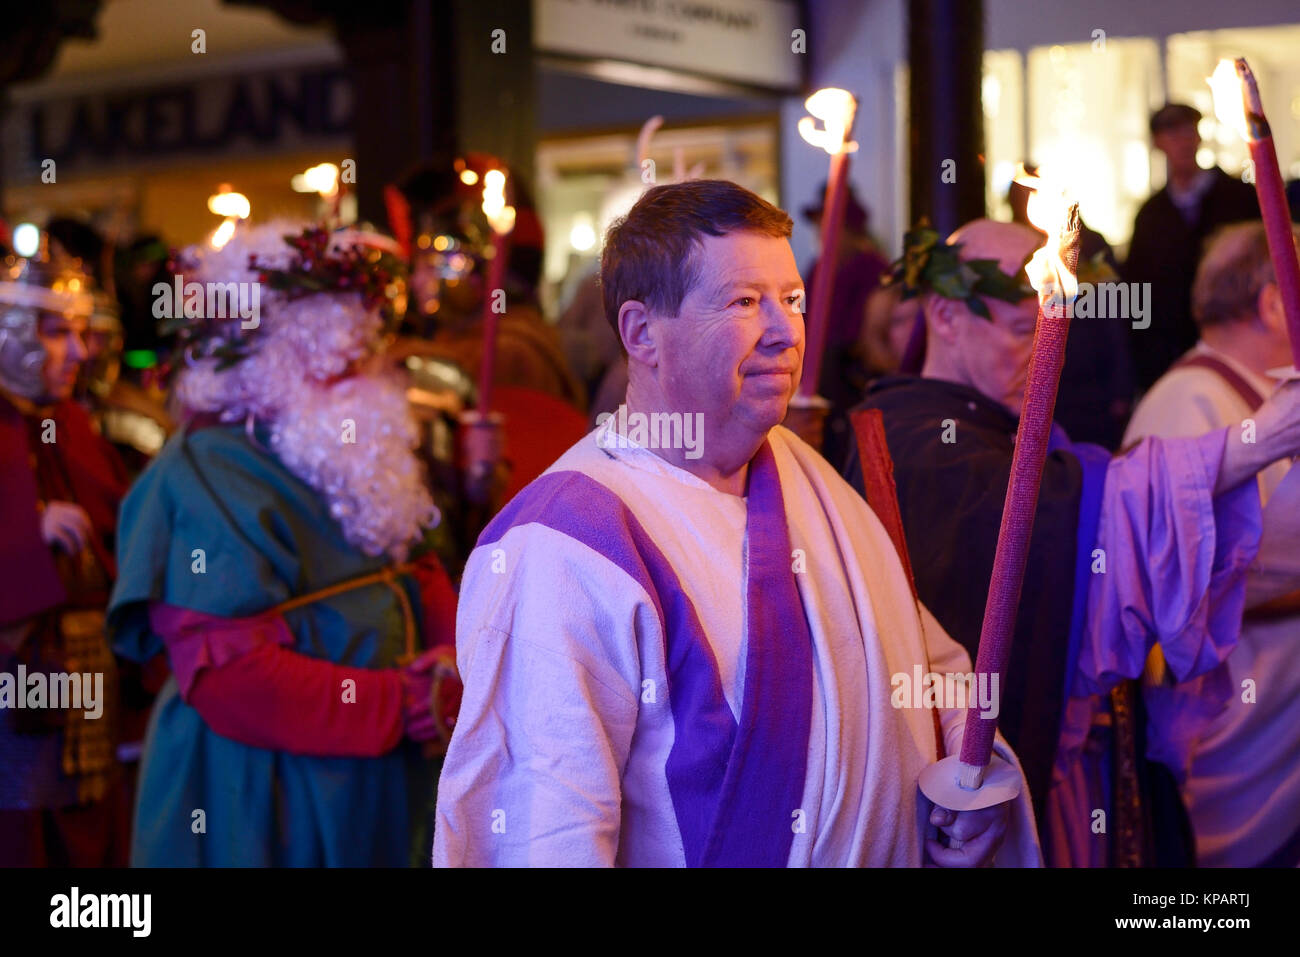 Chester, UK. 14th December 2017. A performer in Roman costume takes part in the annual Winter Watch parade through the city centre. The parade involves musicians, street theatre and costume performances with characters including angels, devils, skeletons and dragons. Credit: Andrew Paterson/Alamy Live News Stock Photo